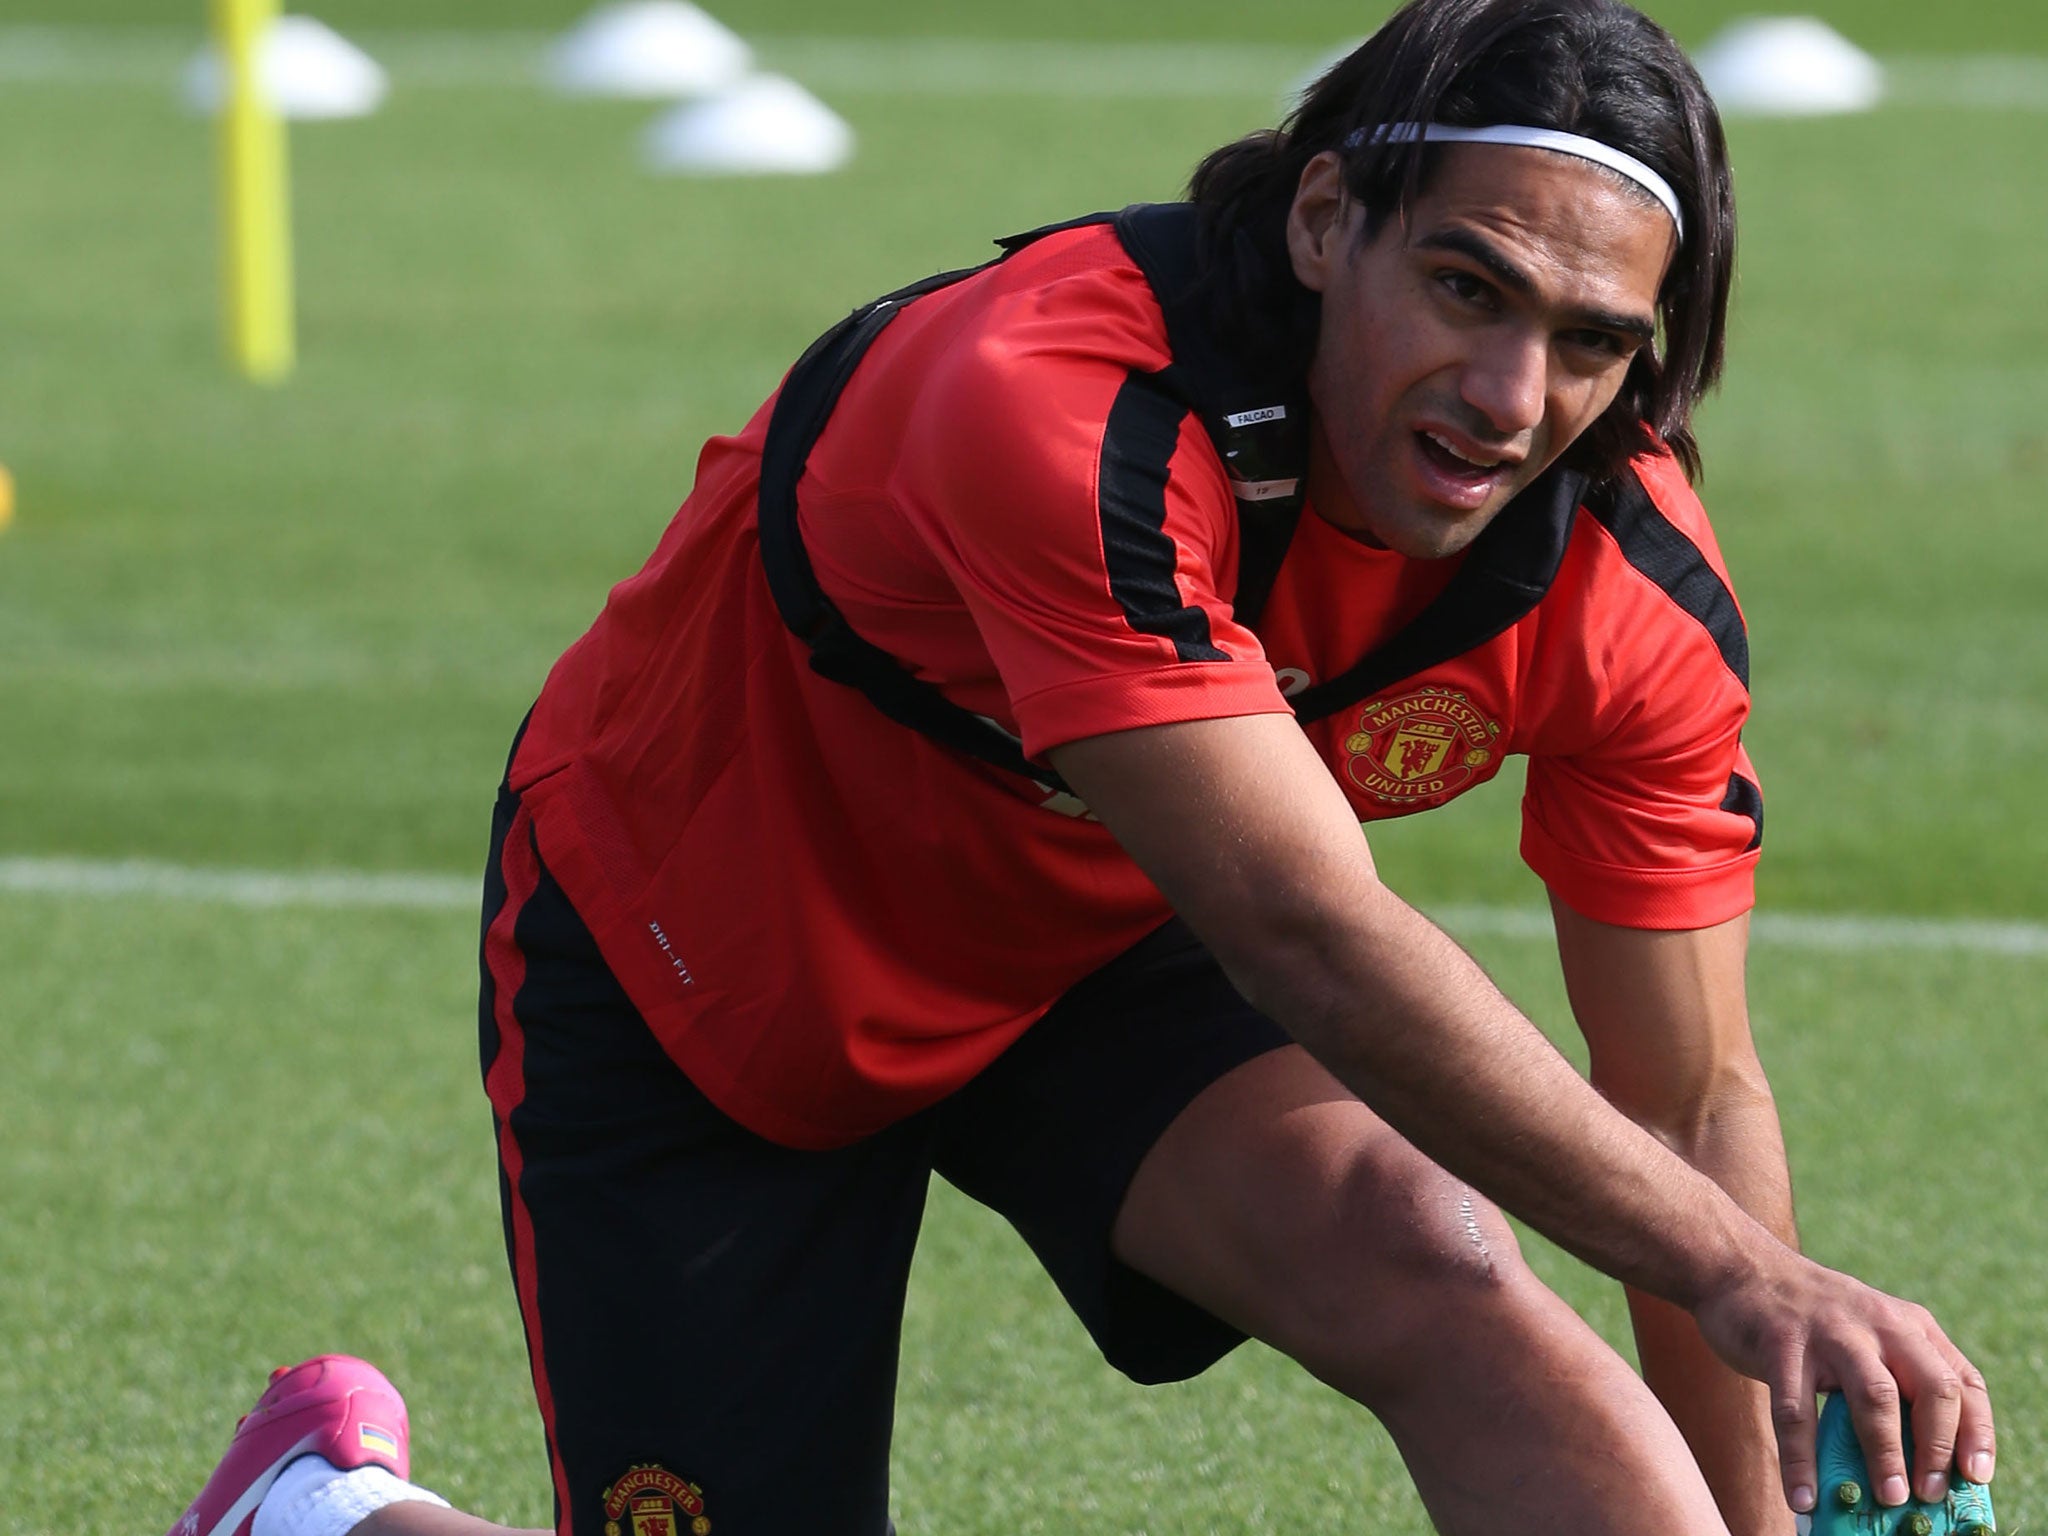 Radamel Falcao prepares to face Queens Park Rangers in his Manchester United debut